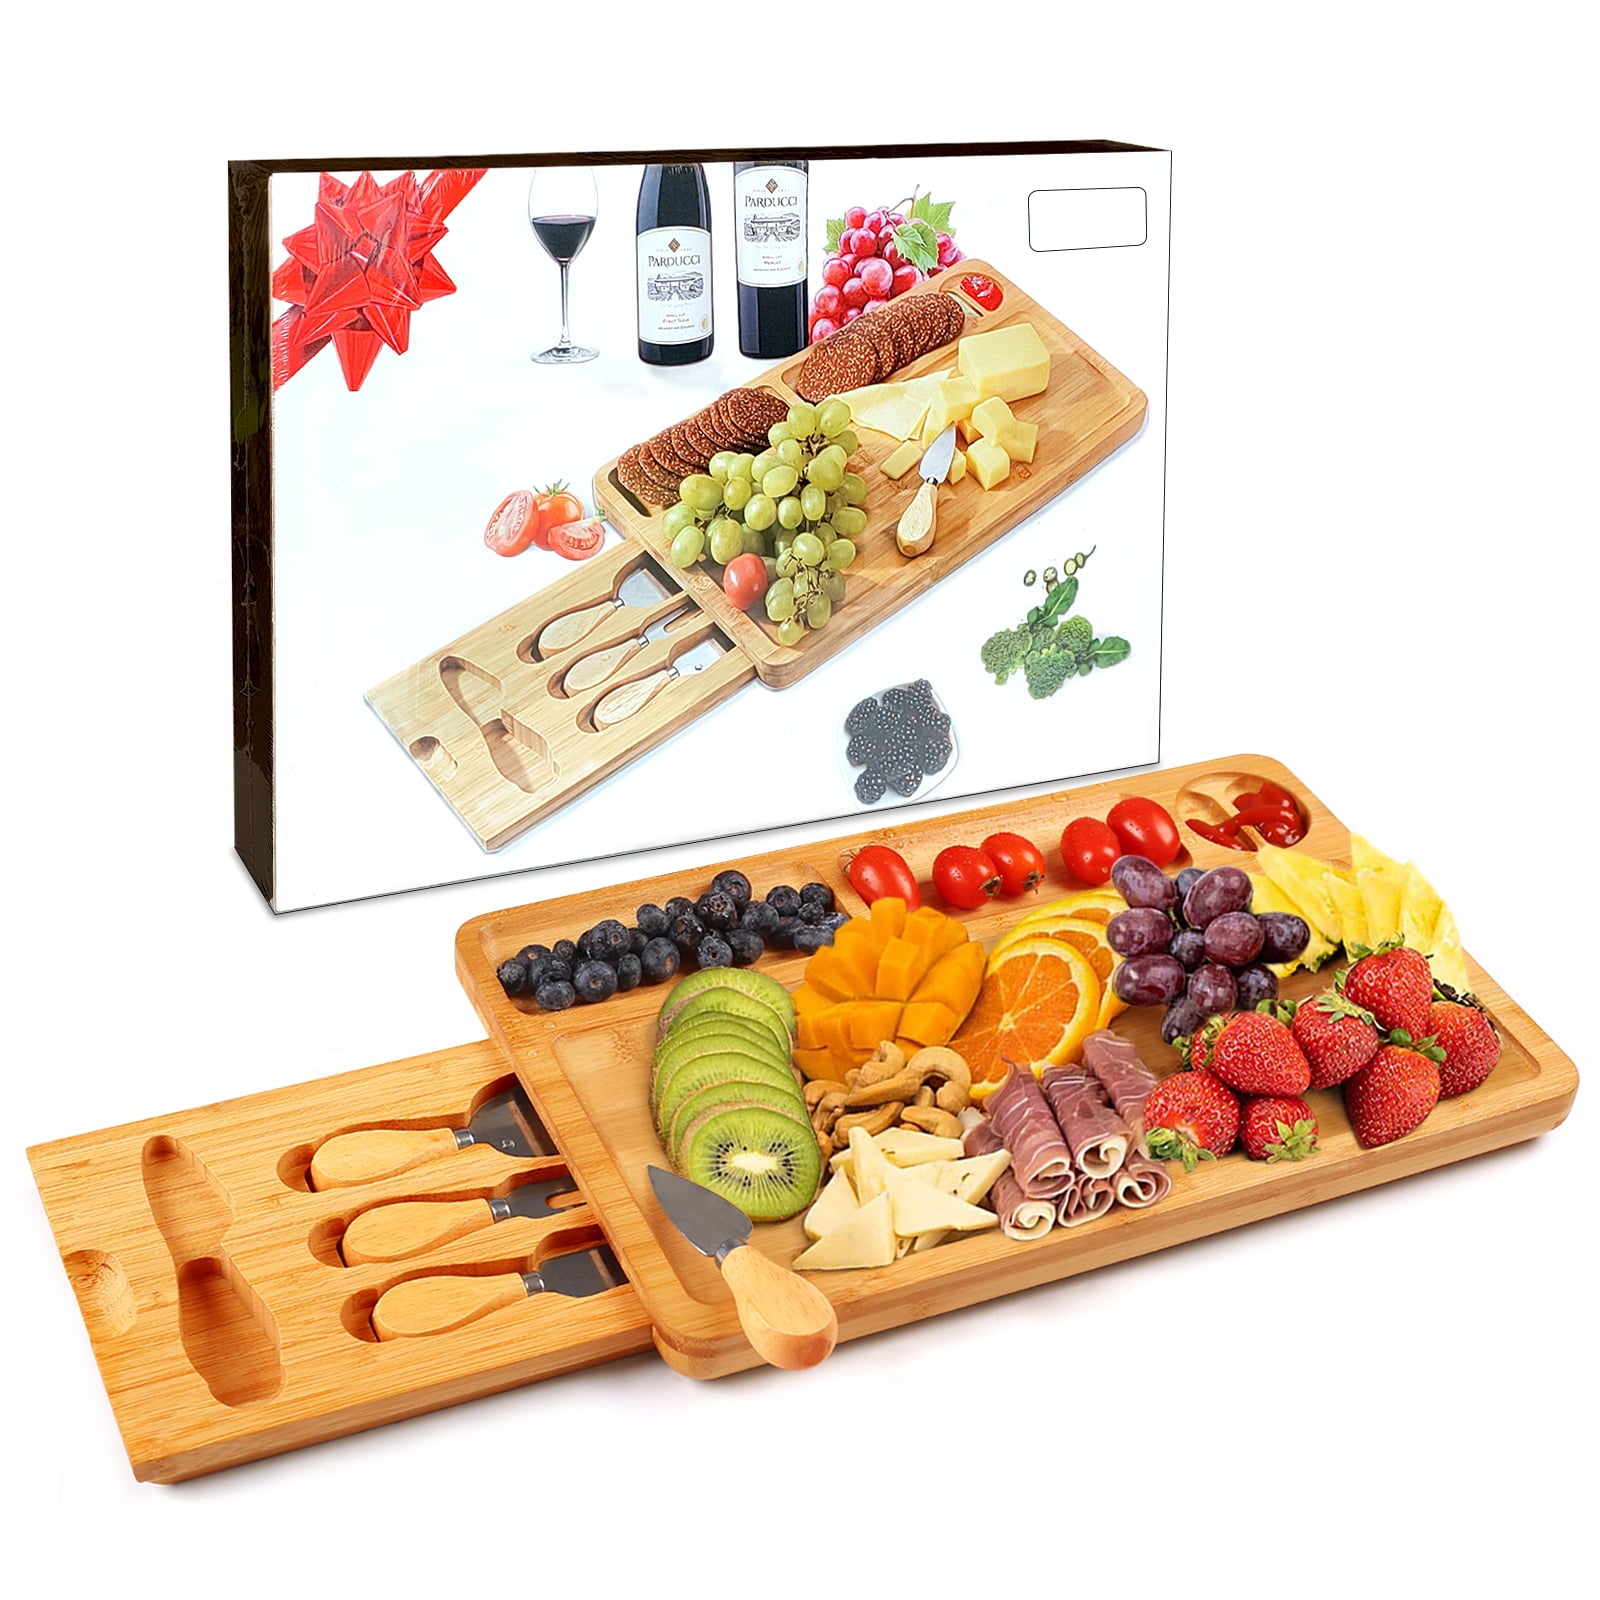 NIUXX Cheese Board with Cheese Knives Cheese Charcuterie Platter Board with Built-in 2 Compartments and 1 Saucer Serving Tray with Hidden Cutlery Drawer for Christmas Wedding Housewarming Party